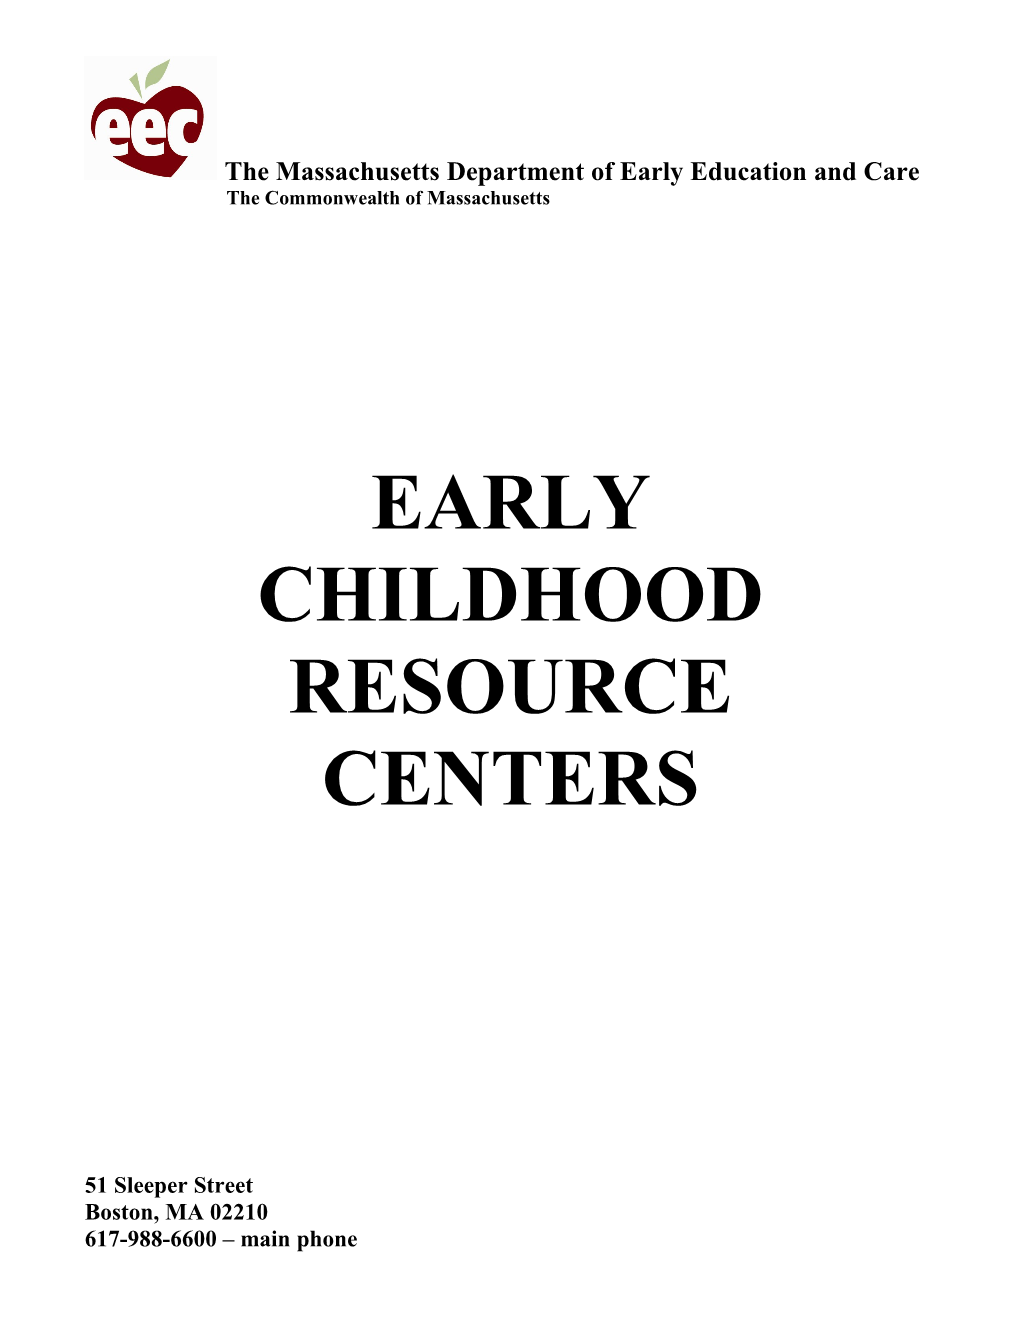 Early Childhood Resource Centers